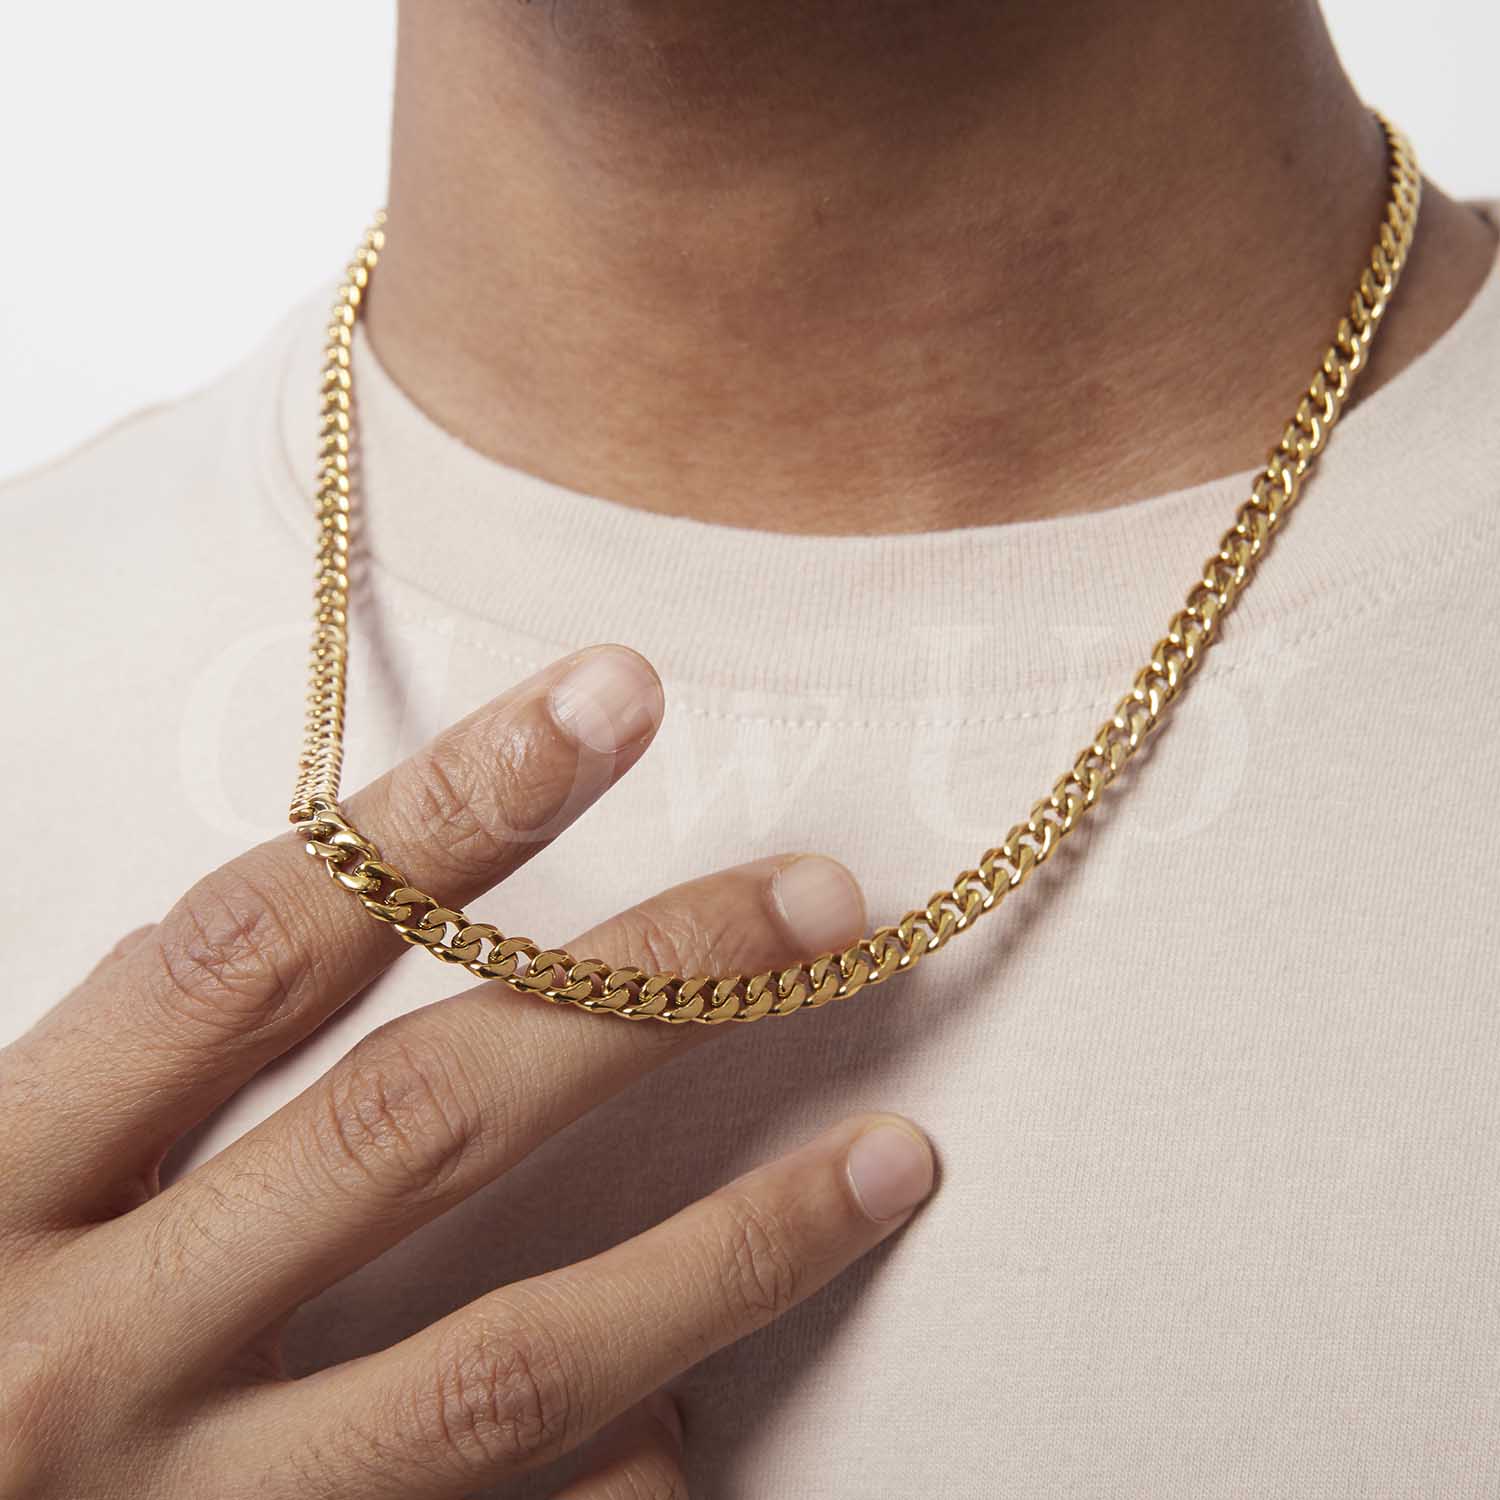 ShineOn Fulfillment Jewelry To my Sexy Man - You take care of me - Cuban Link Chain